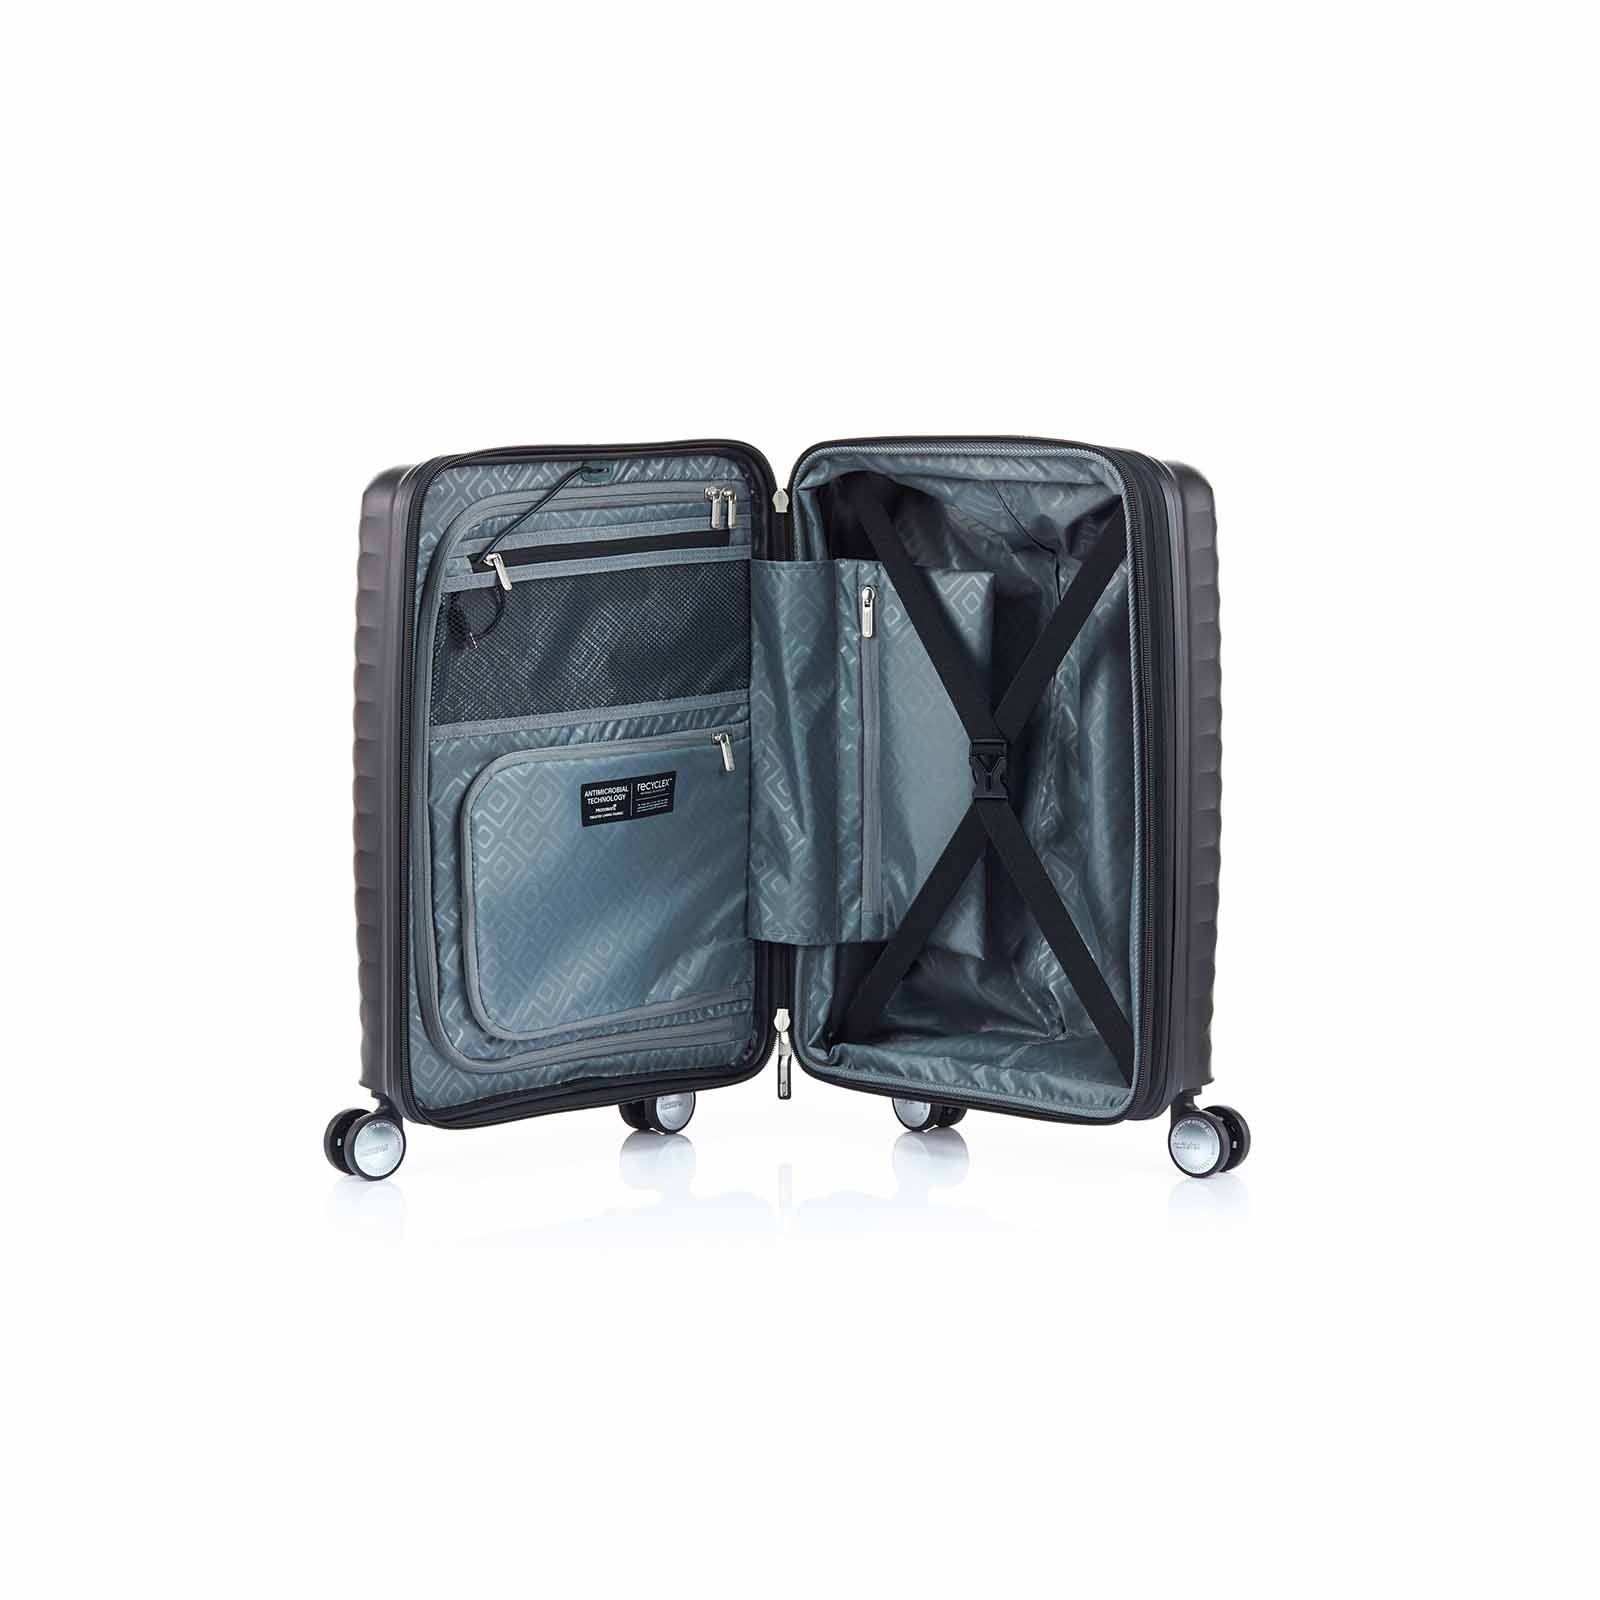 American-Tourister-Squasem-55cm-Carry-On-Suitcase-Black-Open